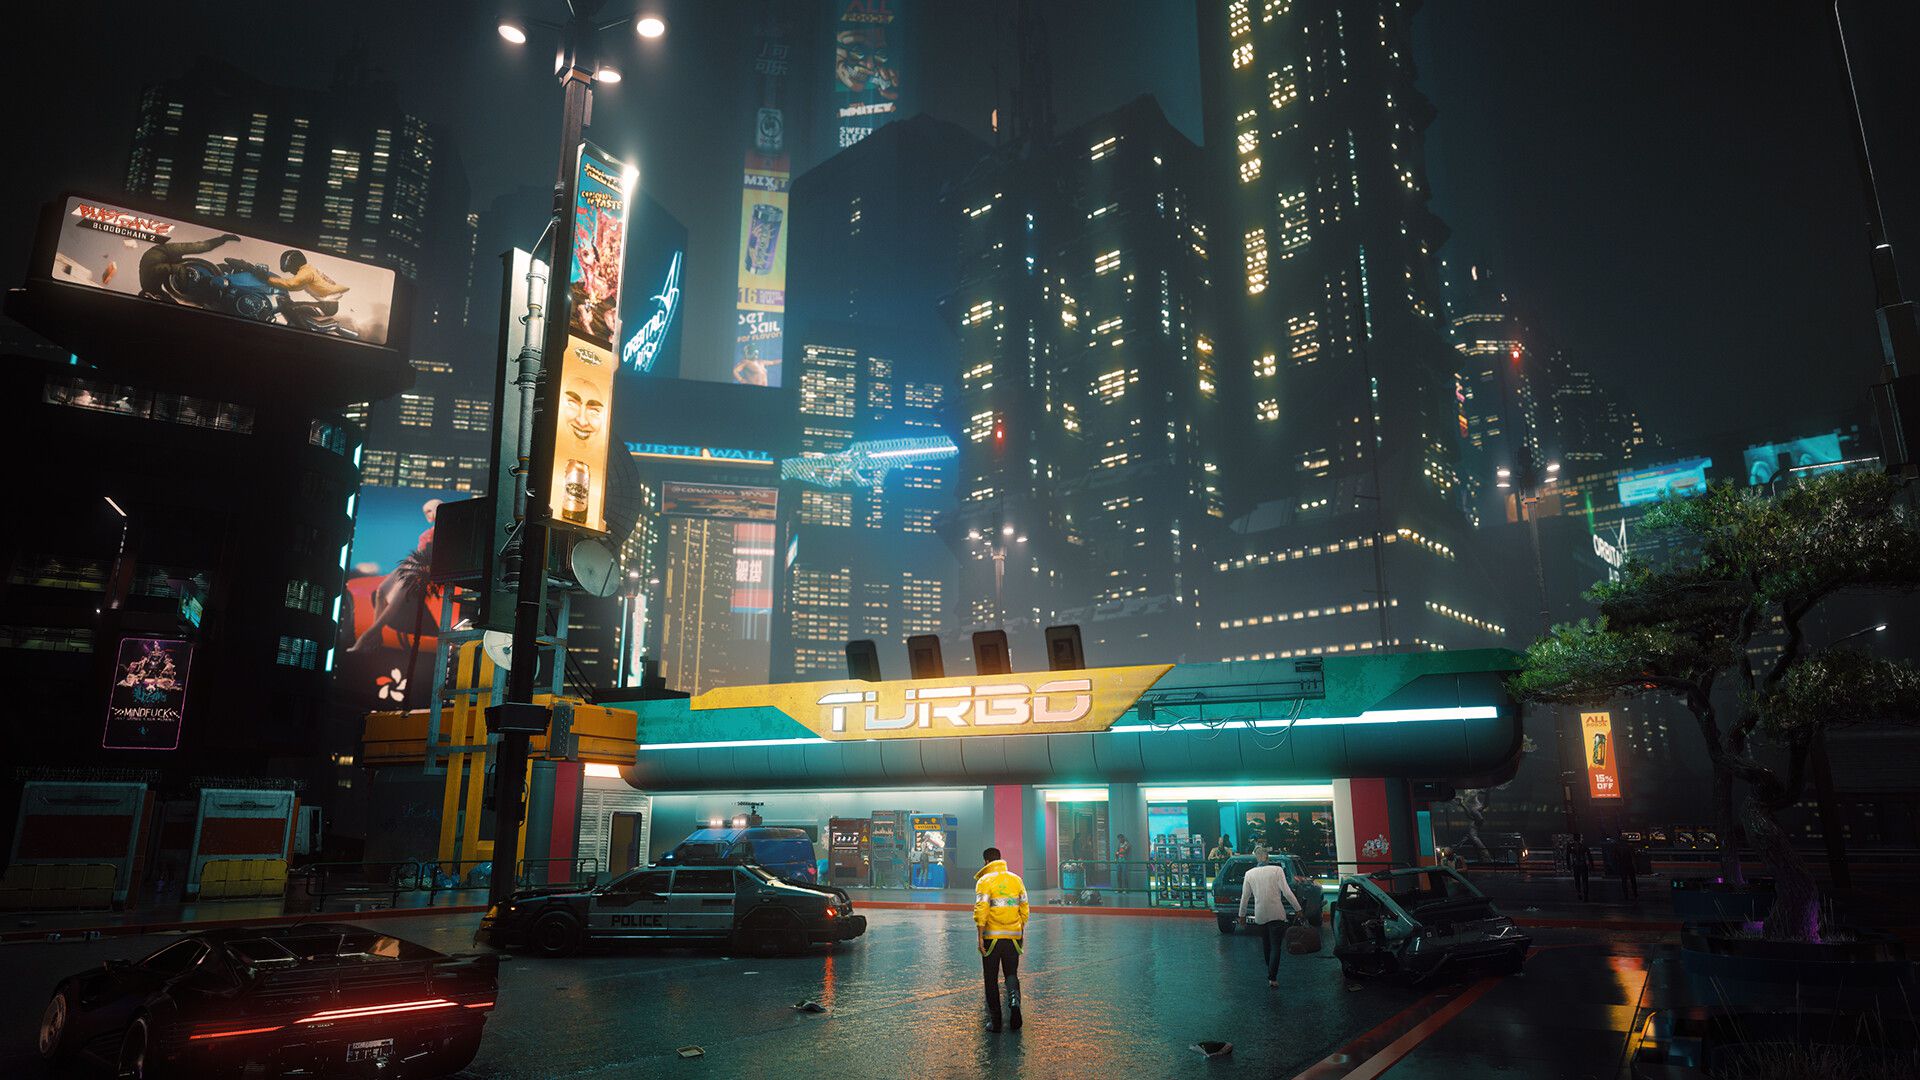 Cyberpunk 2077 Phantom Liberty is the game’s only planned expansion